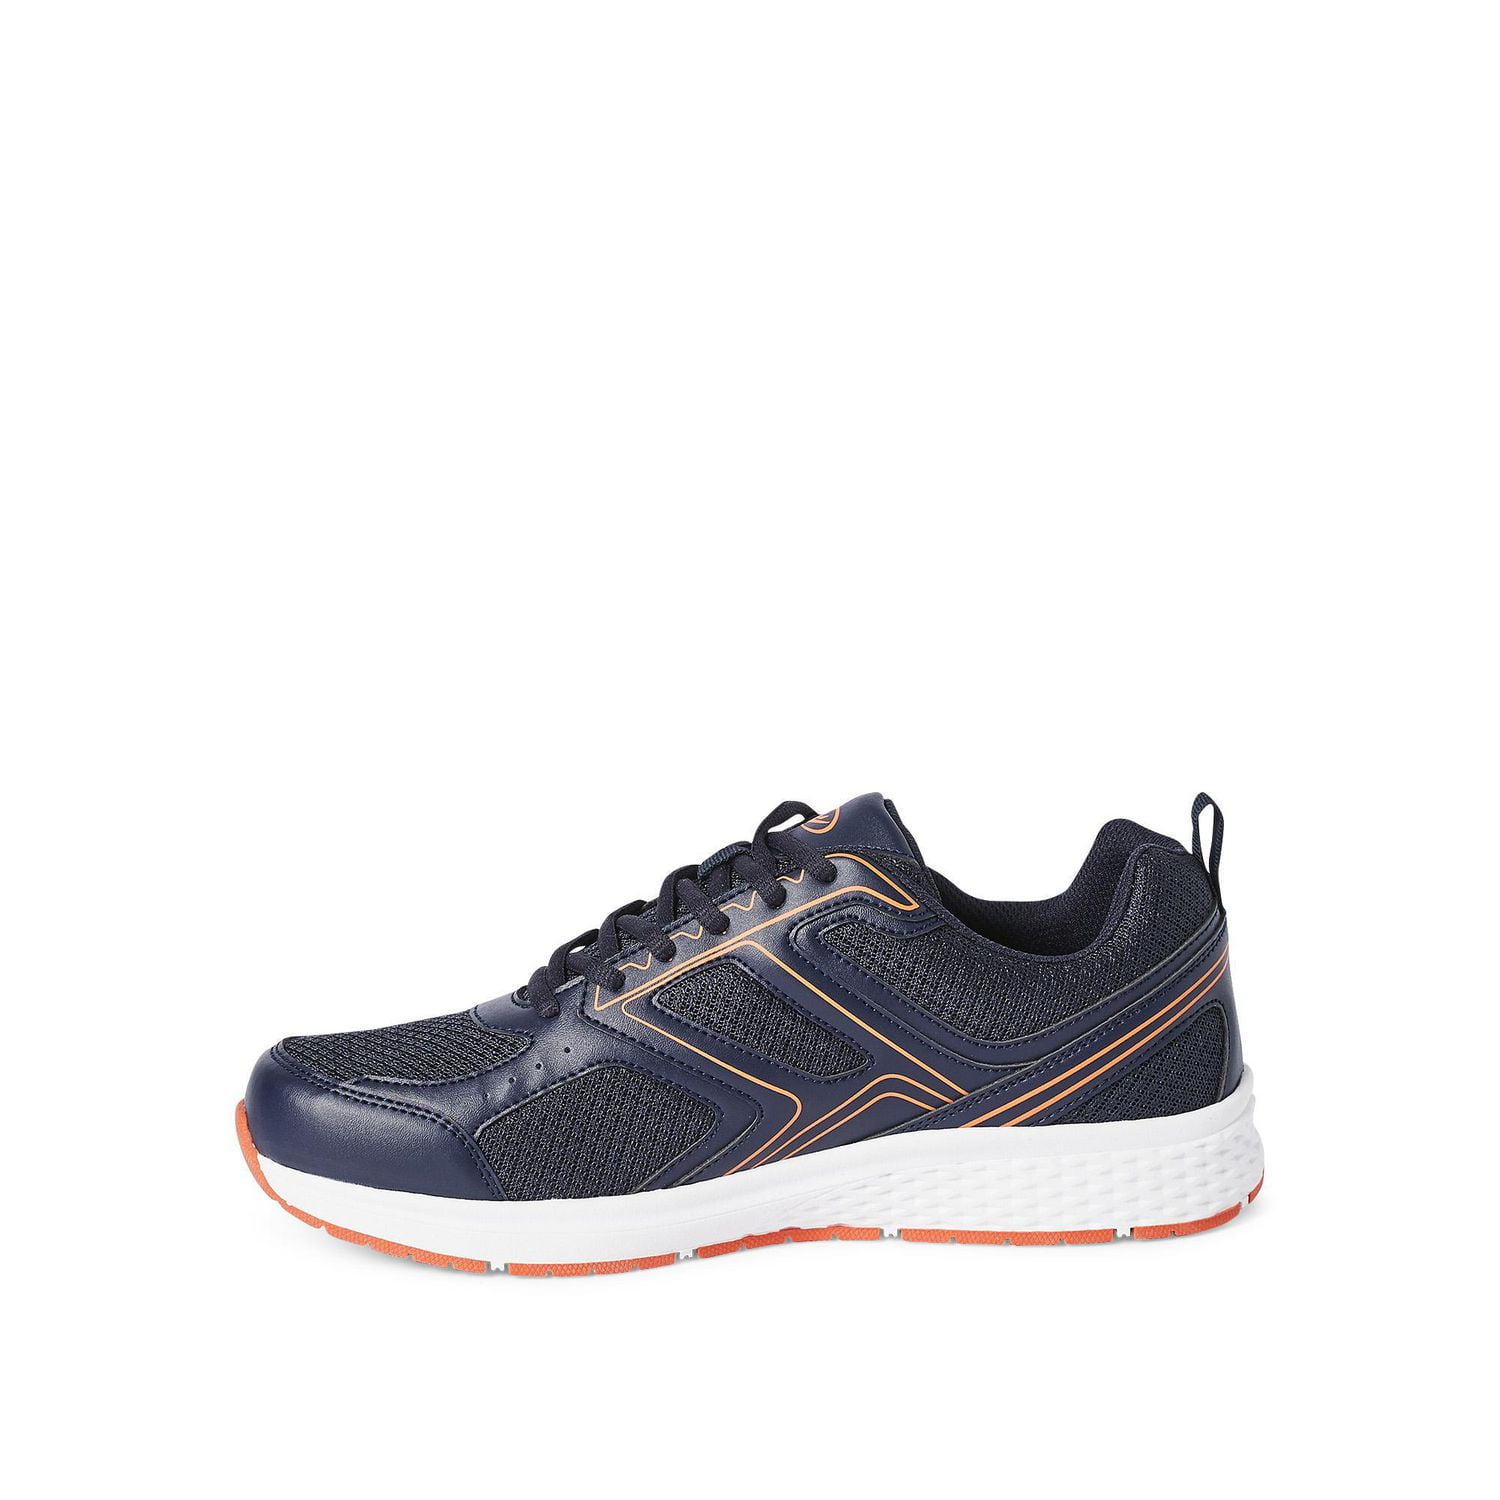 Men's Athletic Shoes, Sneakers & Footwear – Craft Sports Canada